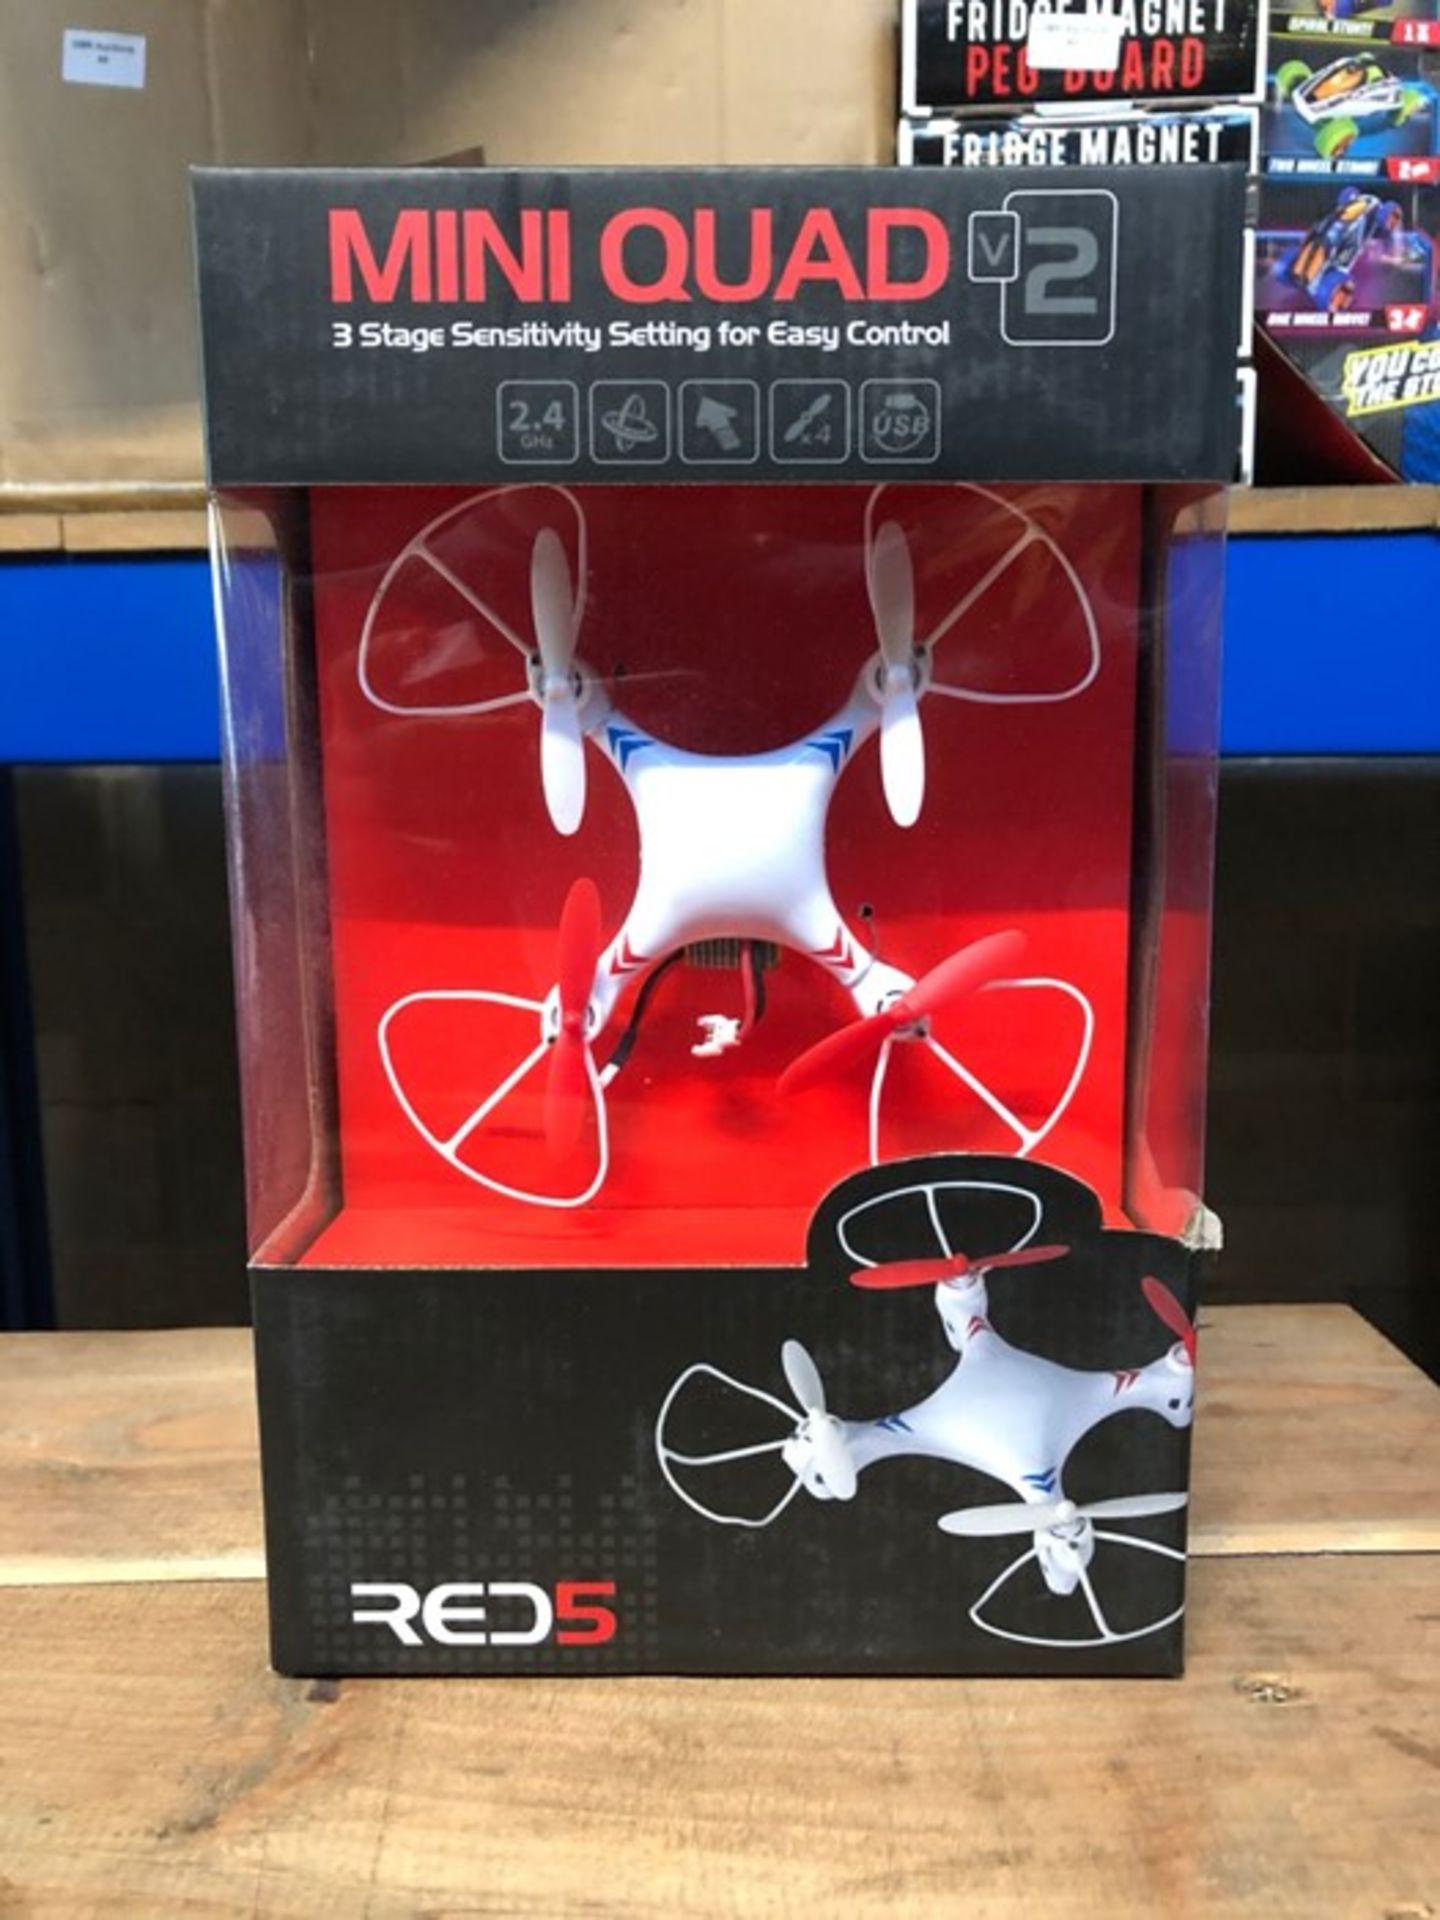 6 X MINI QUAD FLYING TOY - COLOURS VARY / COMBINED RRP £84.00 / LIKE NEW